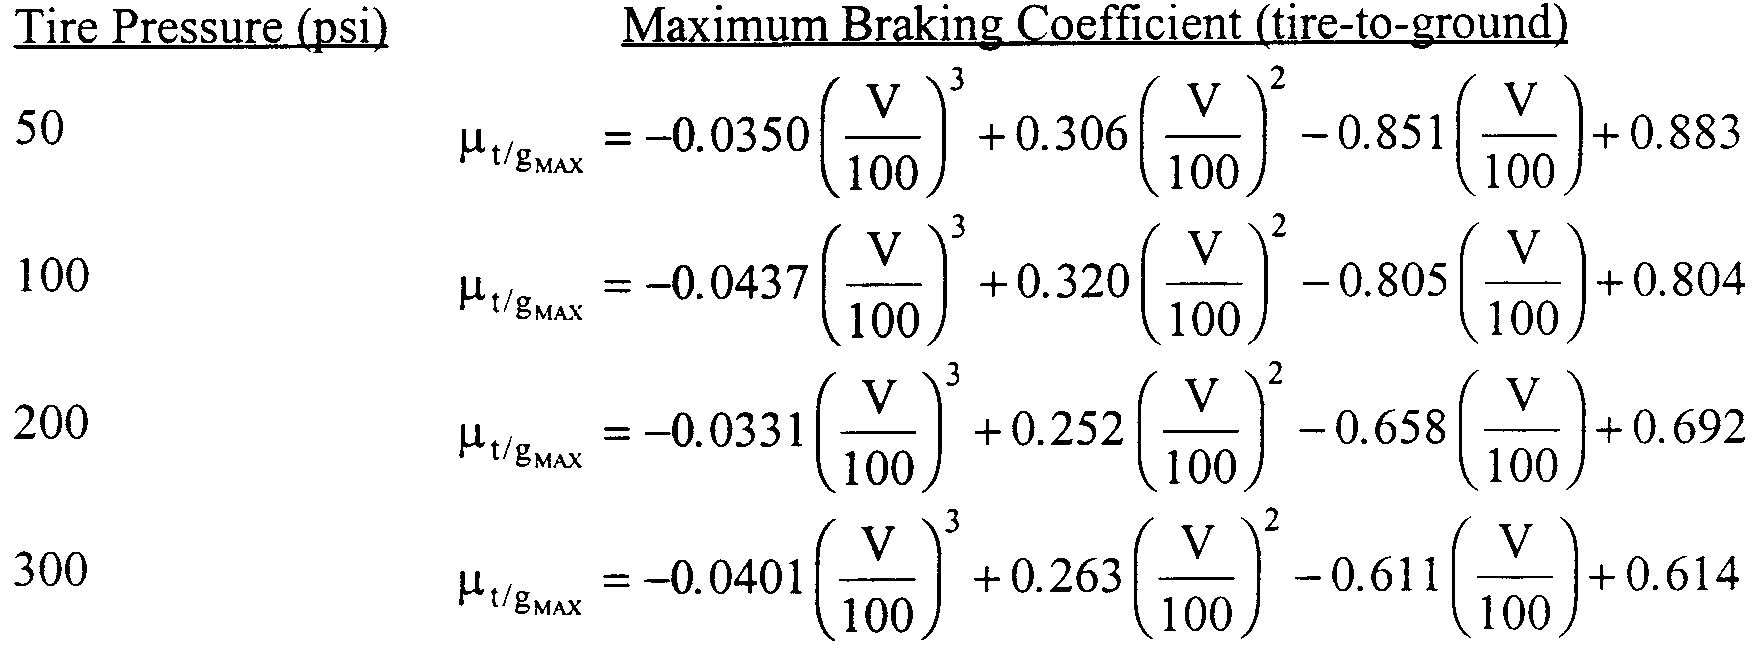 Graphic of (1) The maximum tire-to-ground wet runway braking coefficient of friction is defined as